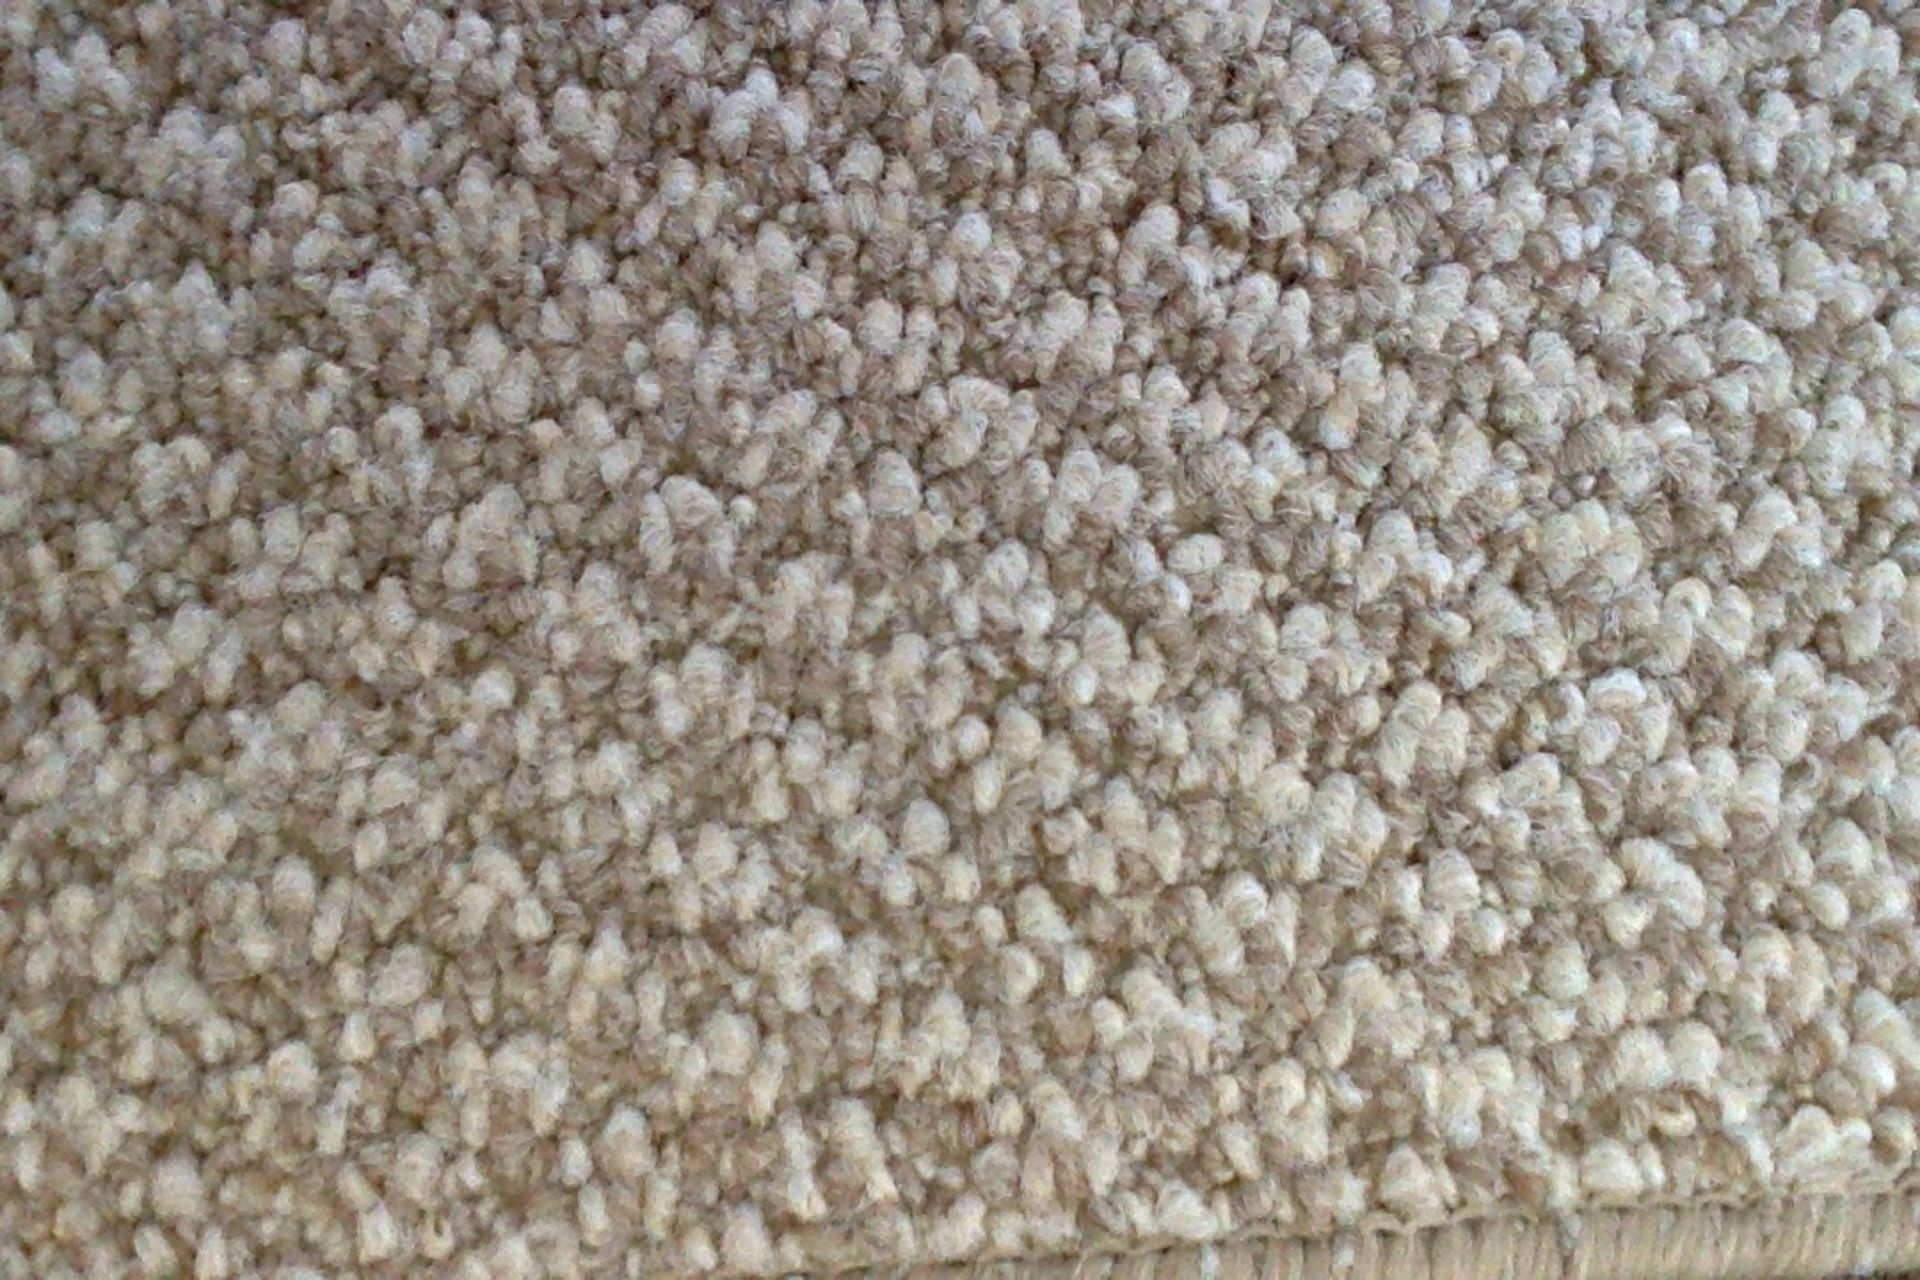 Landlord's Special Heavy Duty Carpet - Biscuit Heavy duty economy carpeting.   17.5x4m - Total 70m2